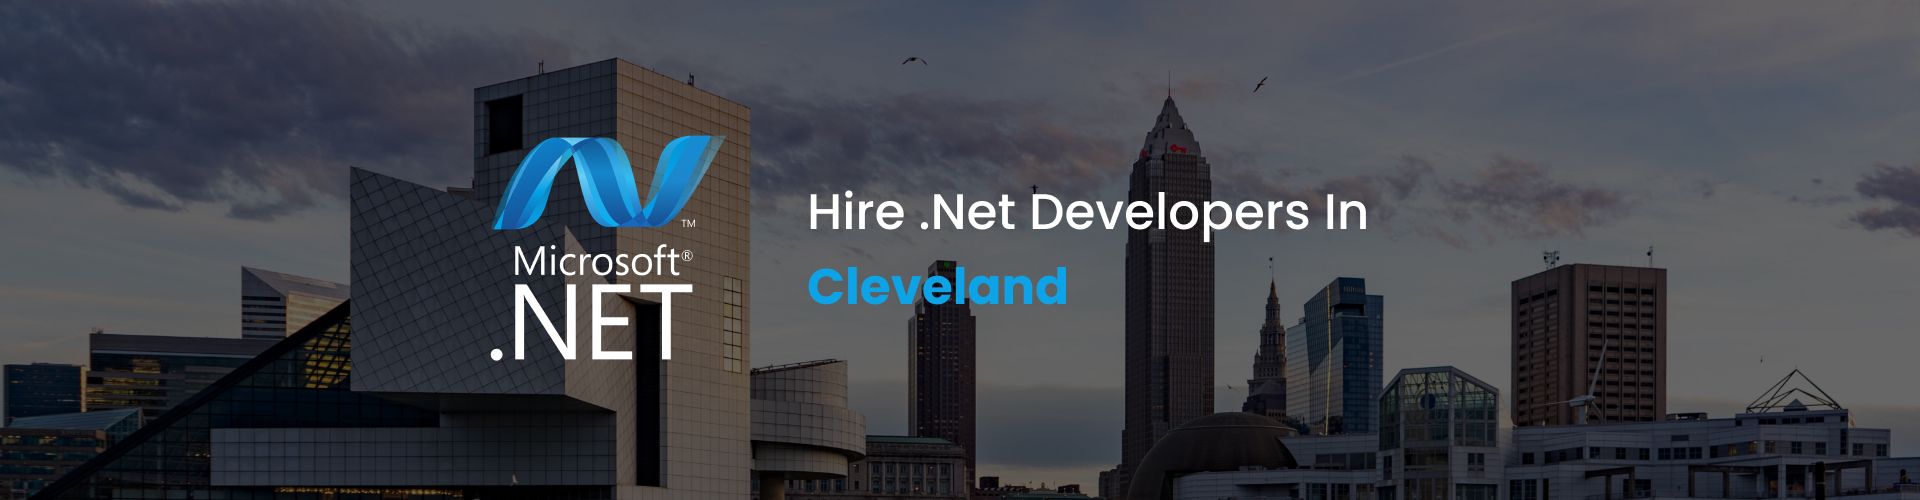 hire .net developers in cleveland